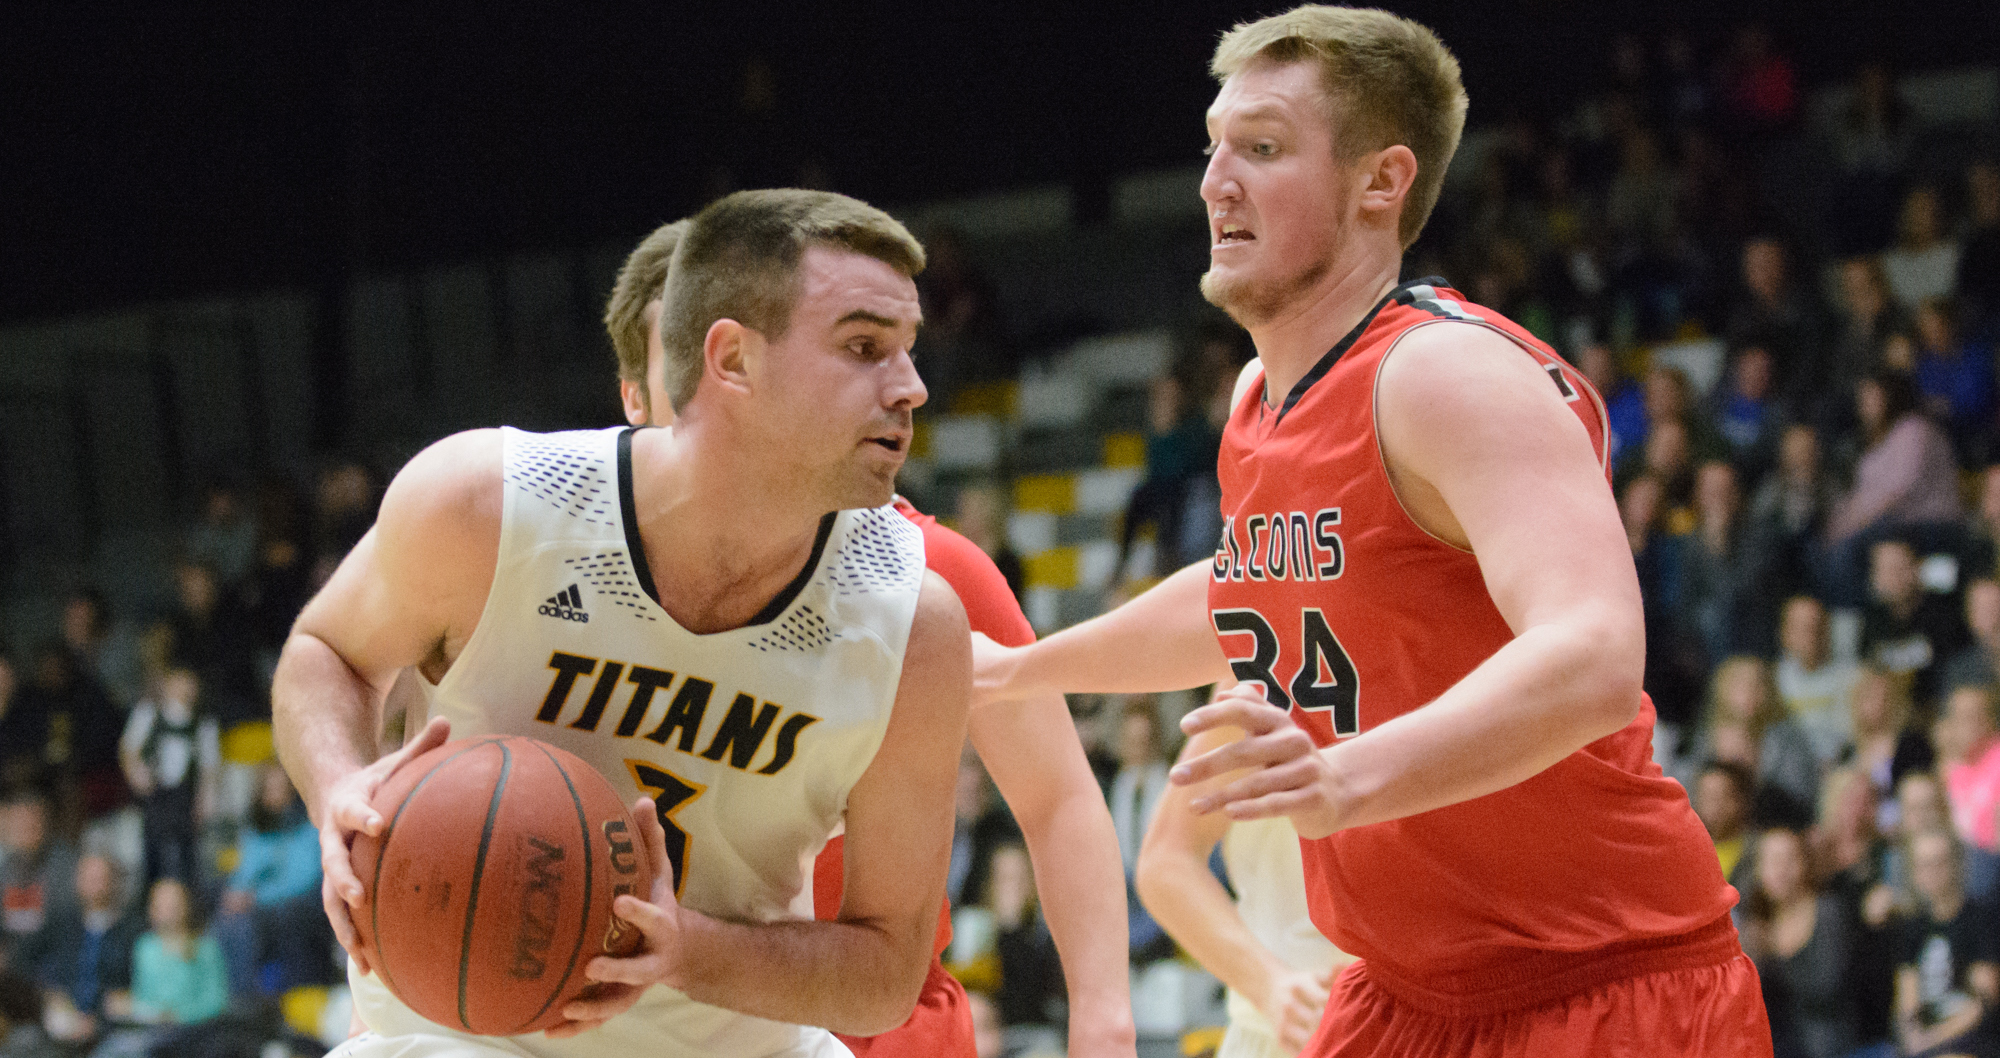 Alex Olson scored 17 points and grabbed eight rebounds during his 103rd game in a UW-Oshkosh uniform.